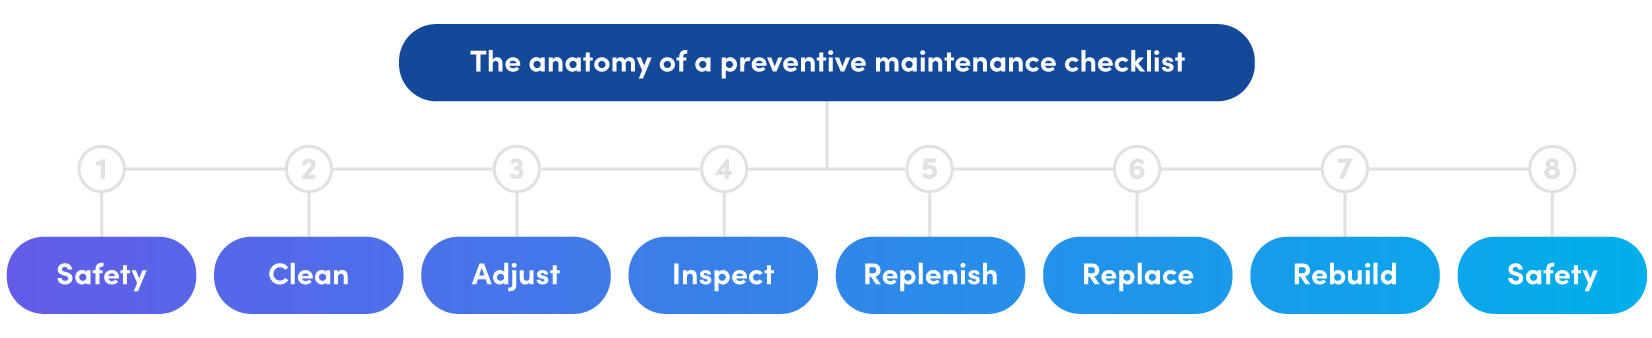 Description of tasks in a great preventive maintenance checklist: Safety, clean, adjust, inspect. replenish, replace, rebuild, safety